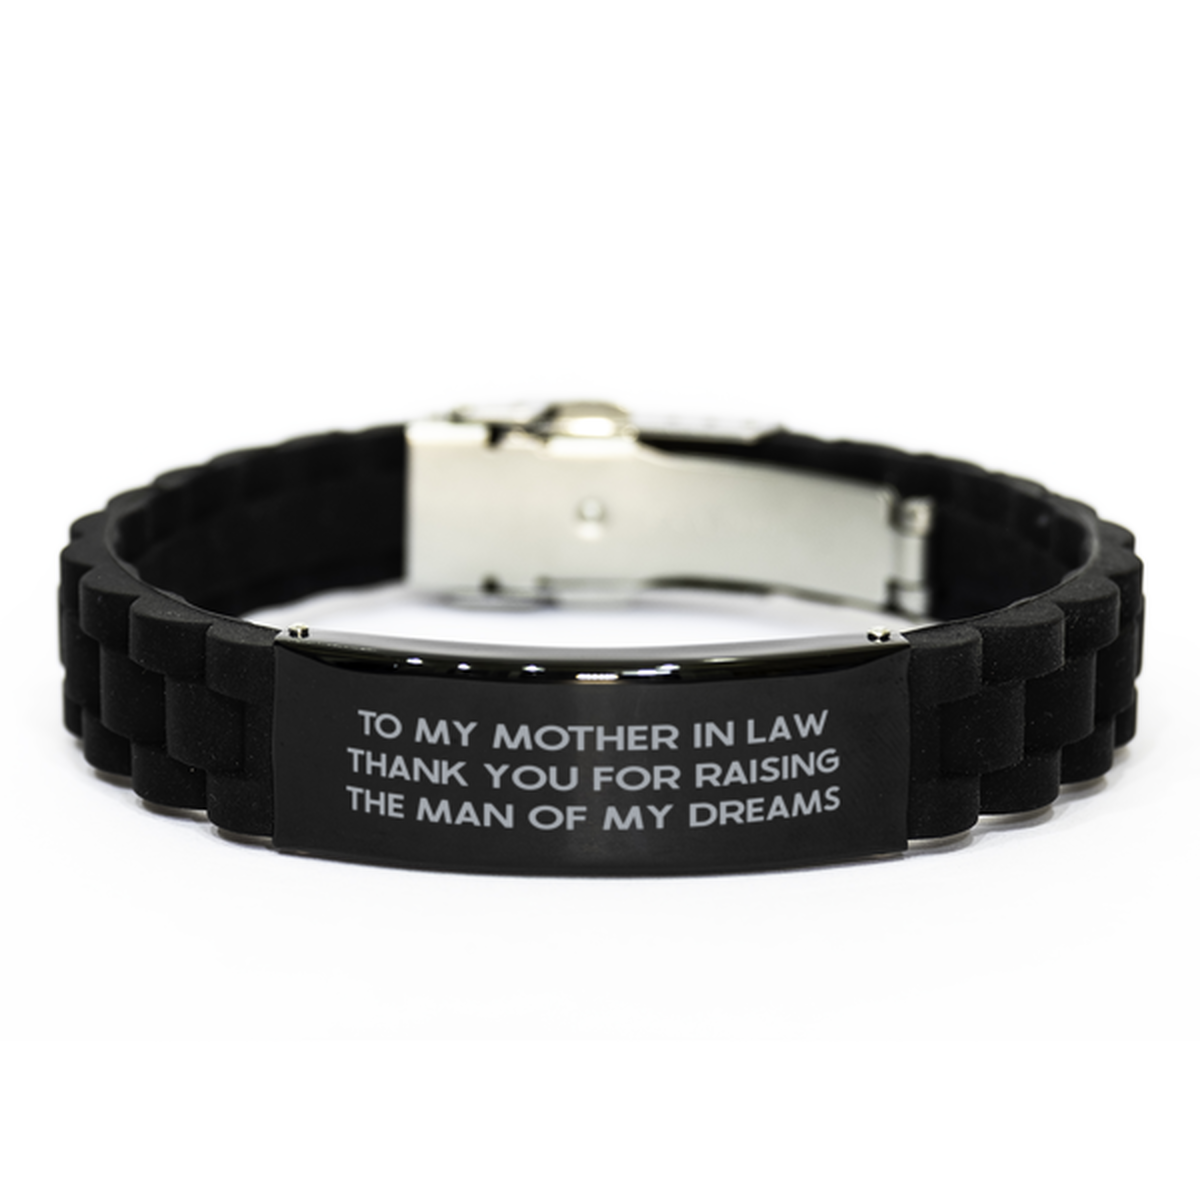 To My Mother-In-Law Black Bracelet, Thank You , Mothers Day Gifts For Mother-In-Law From Daughter-In-Law, Birthday Gifts For Women